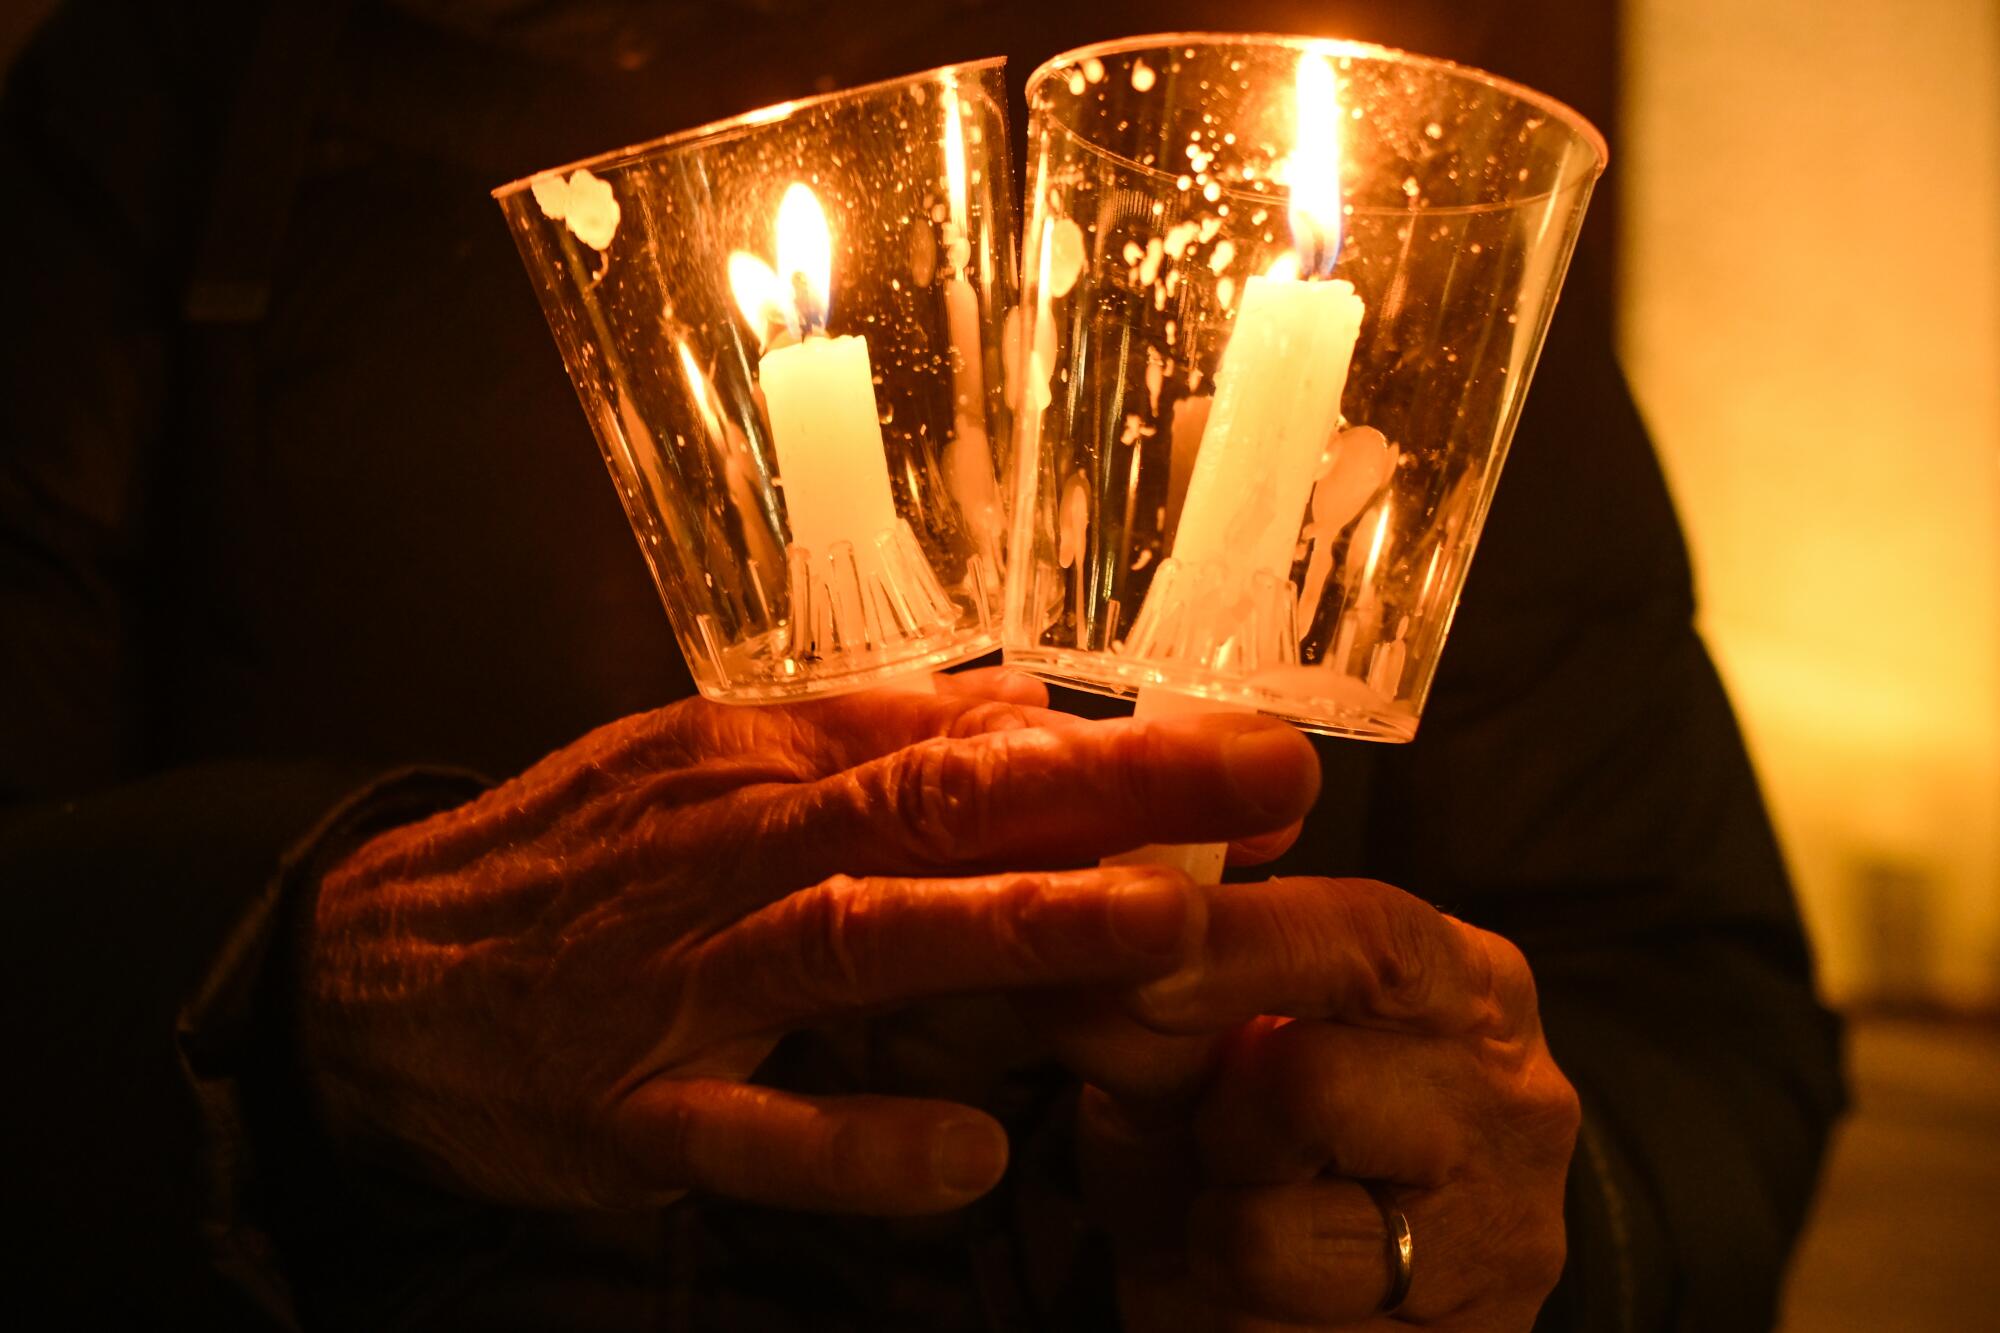 Hands hold two lighted candles